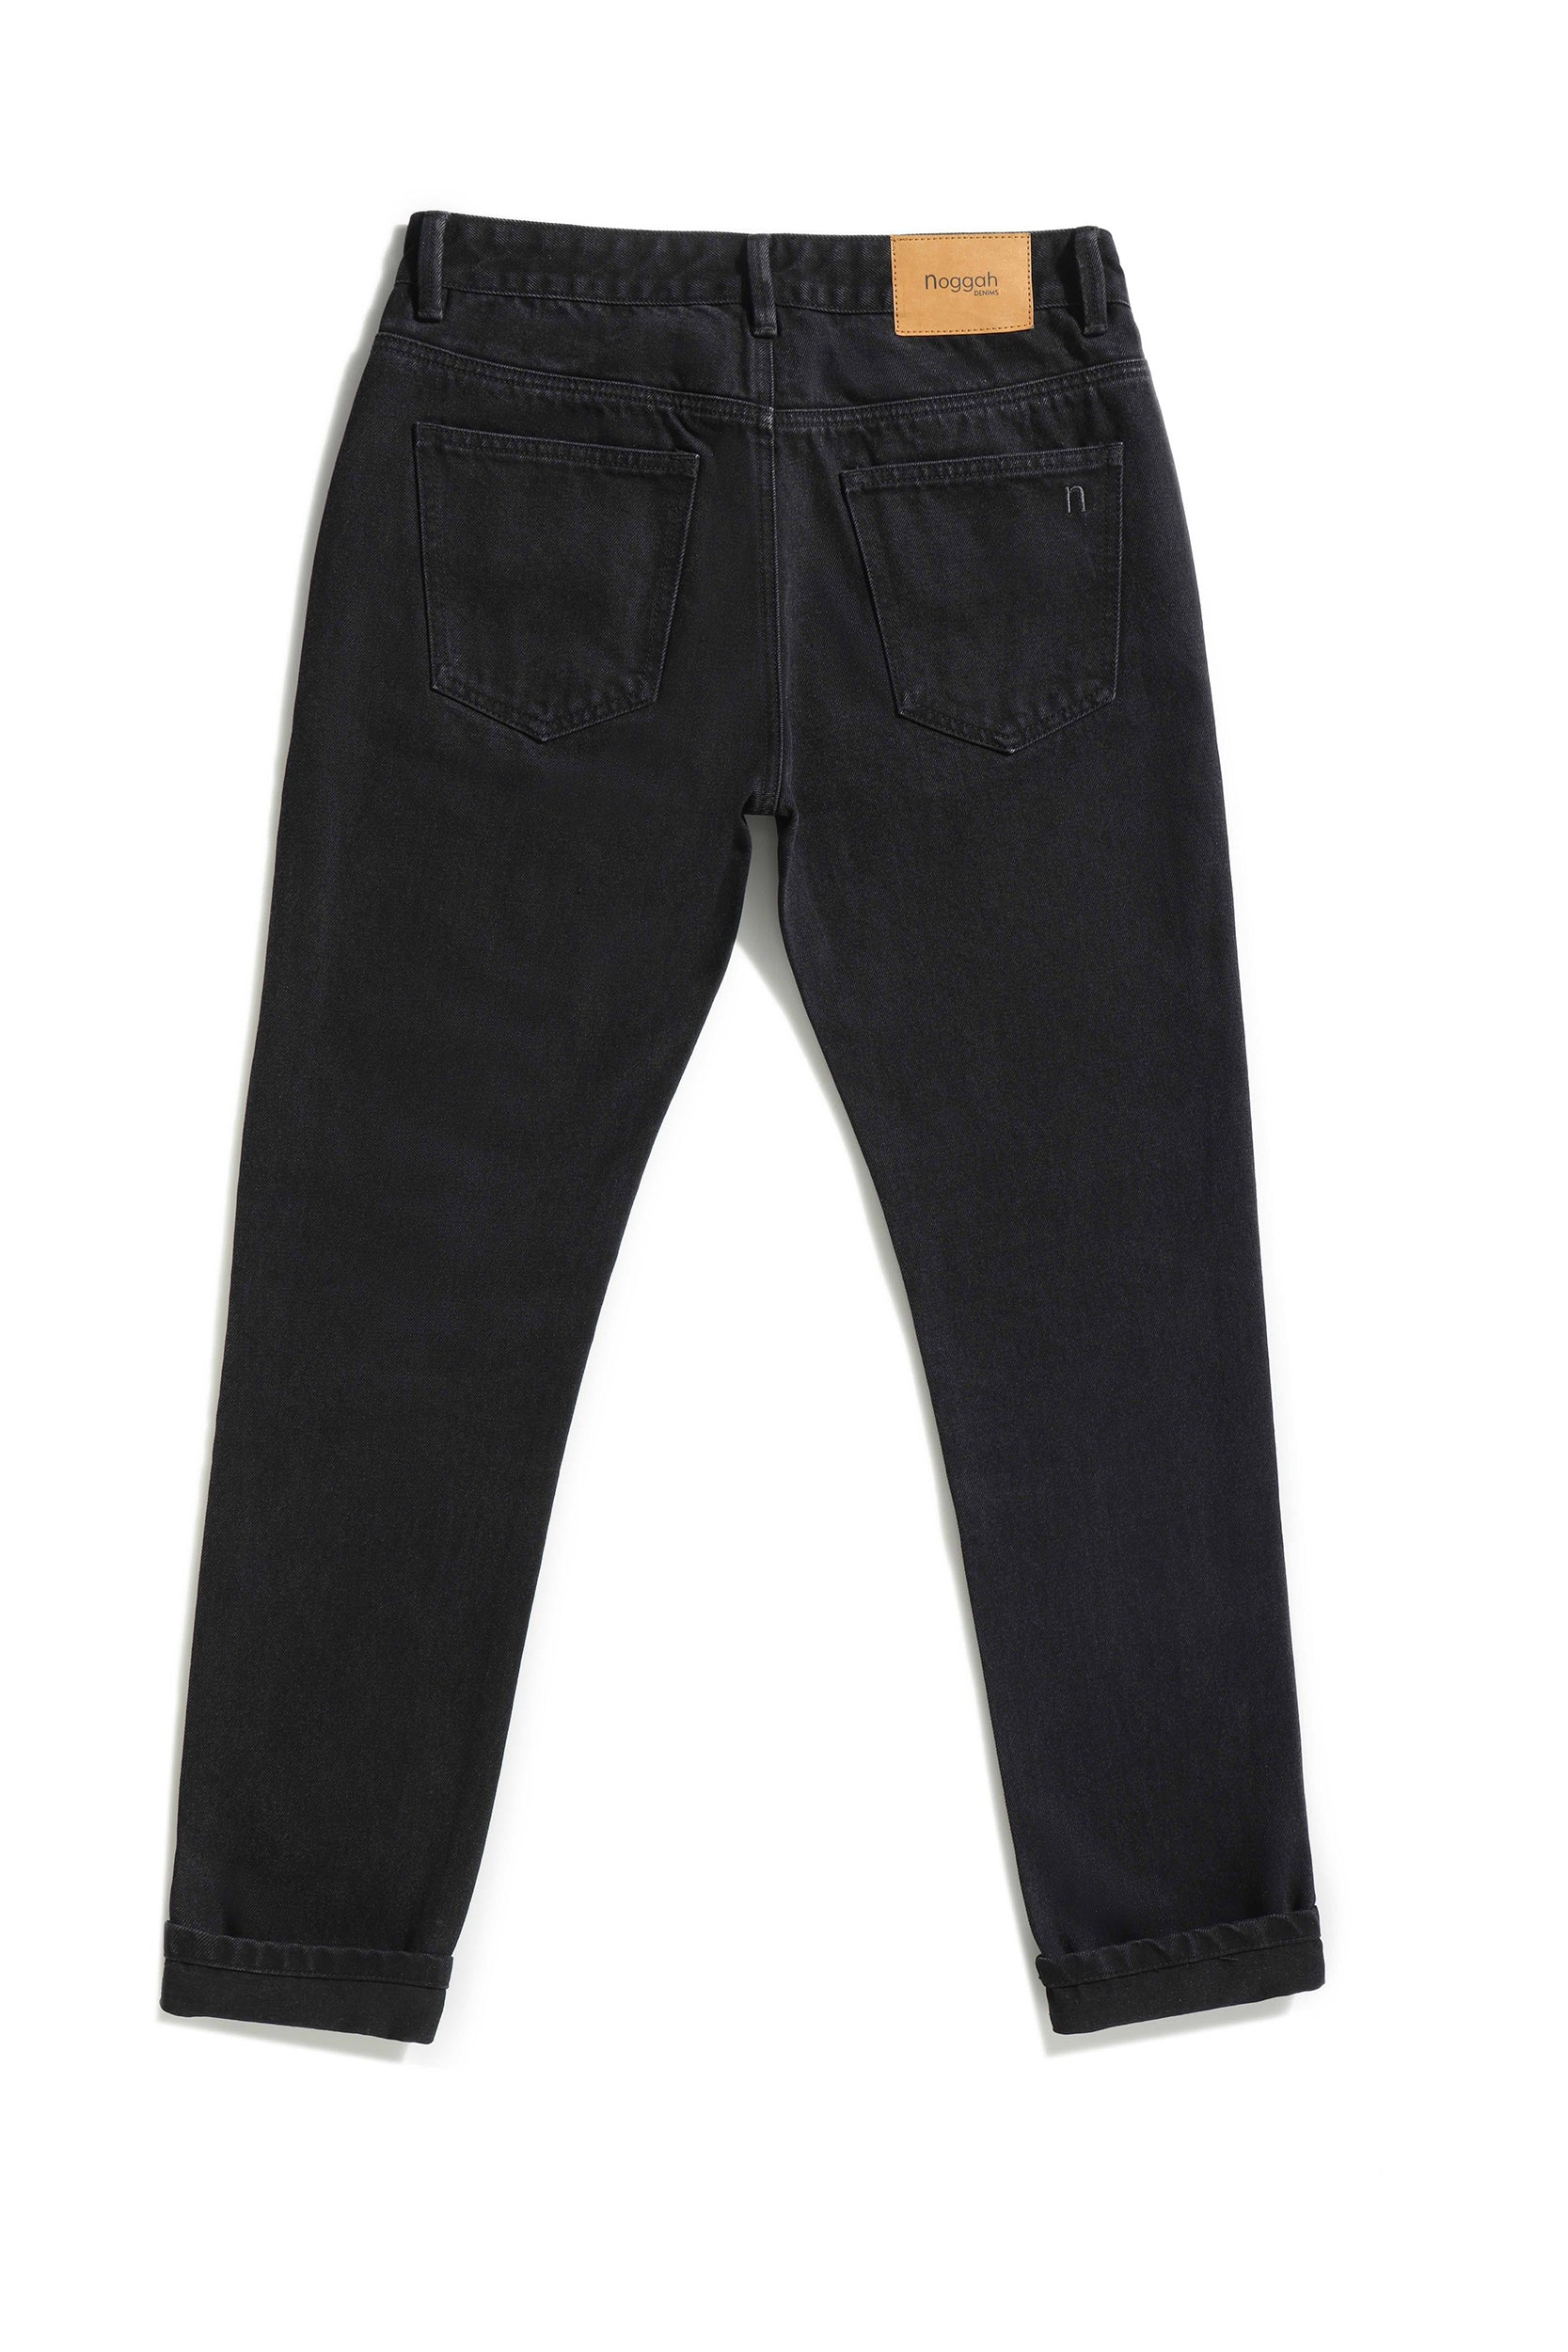 Cotton Jeans for Men in various colors – The World of Jeans